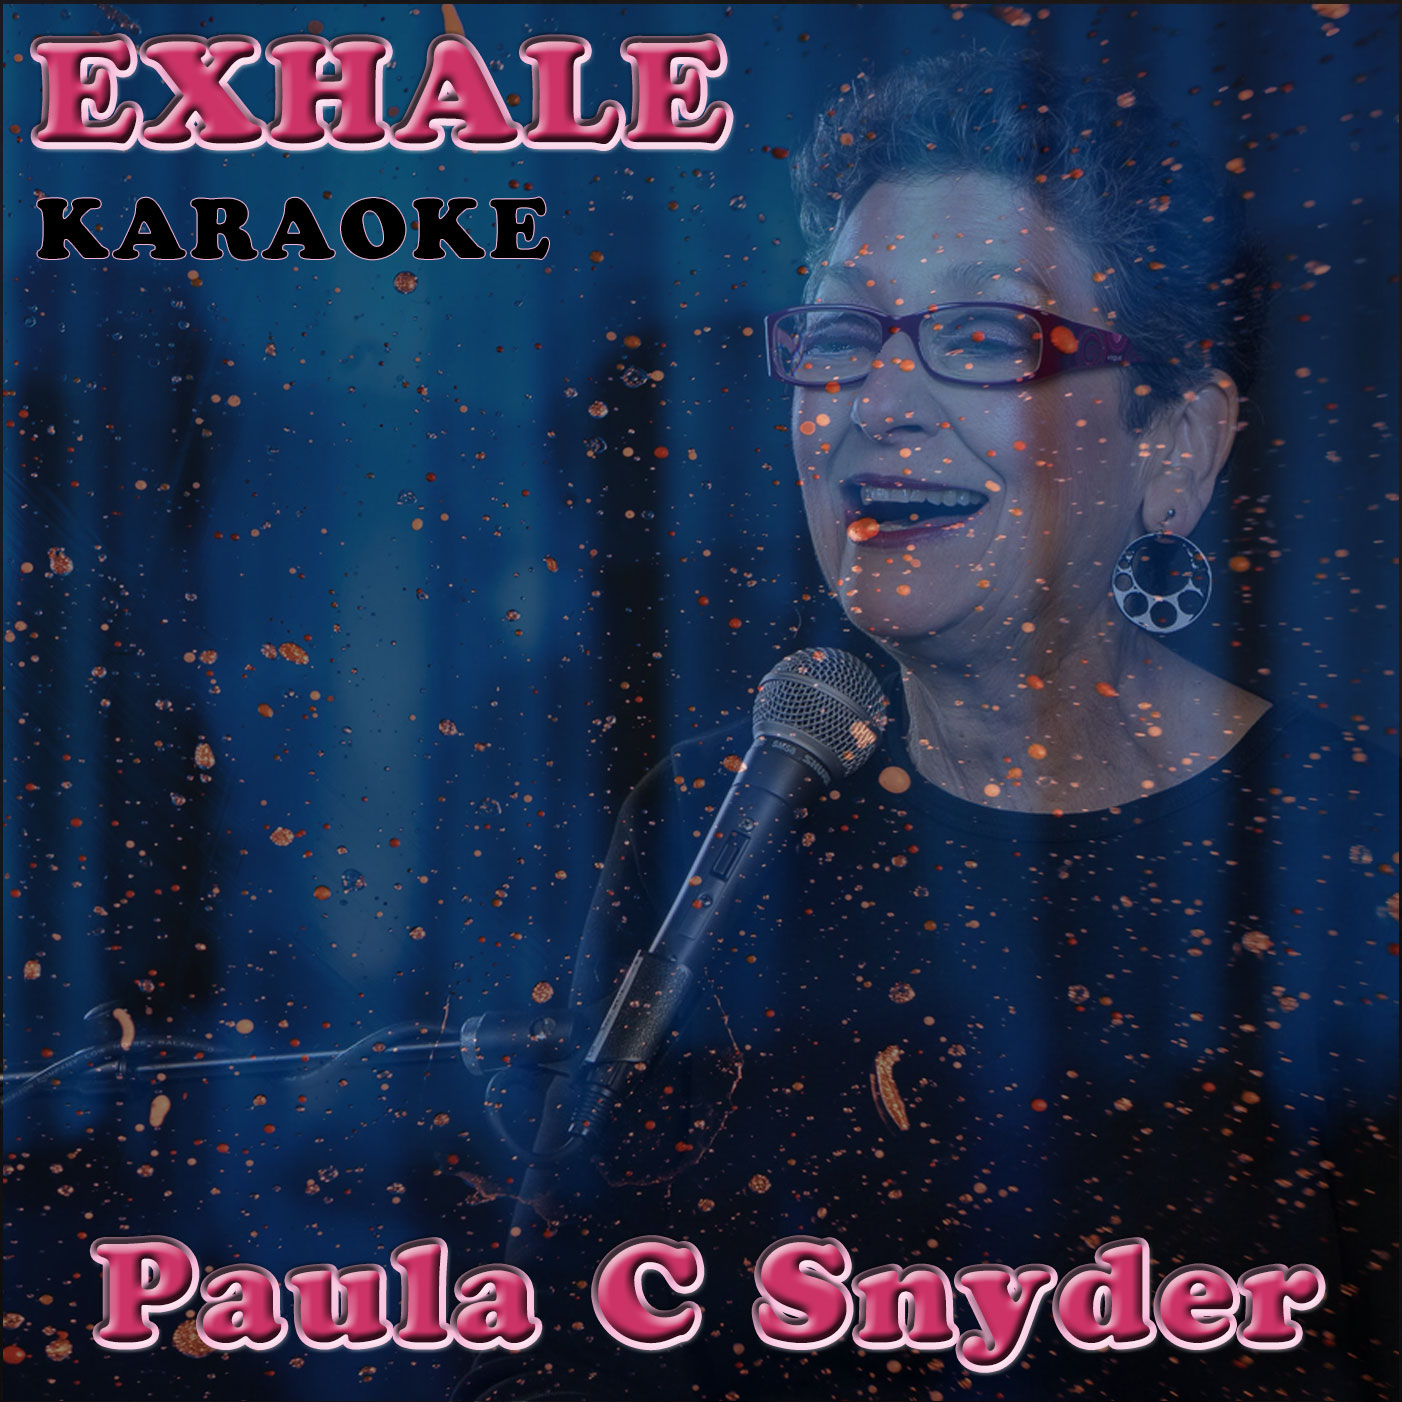 EXHALE KARAOKE COVER NEW PHOTO BEST